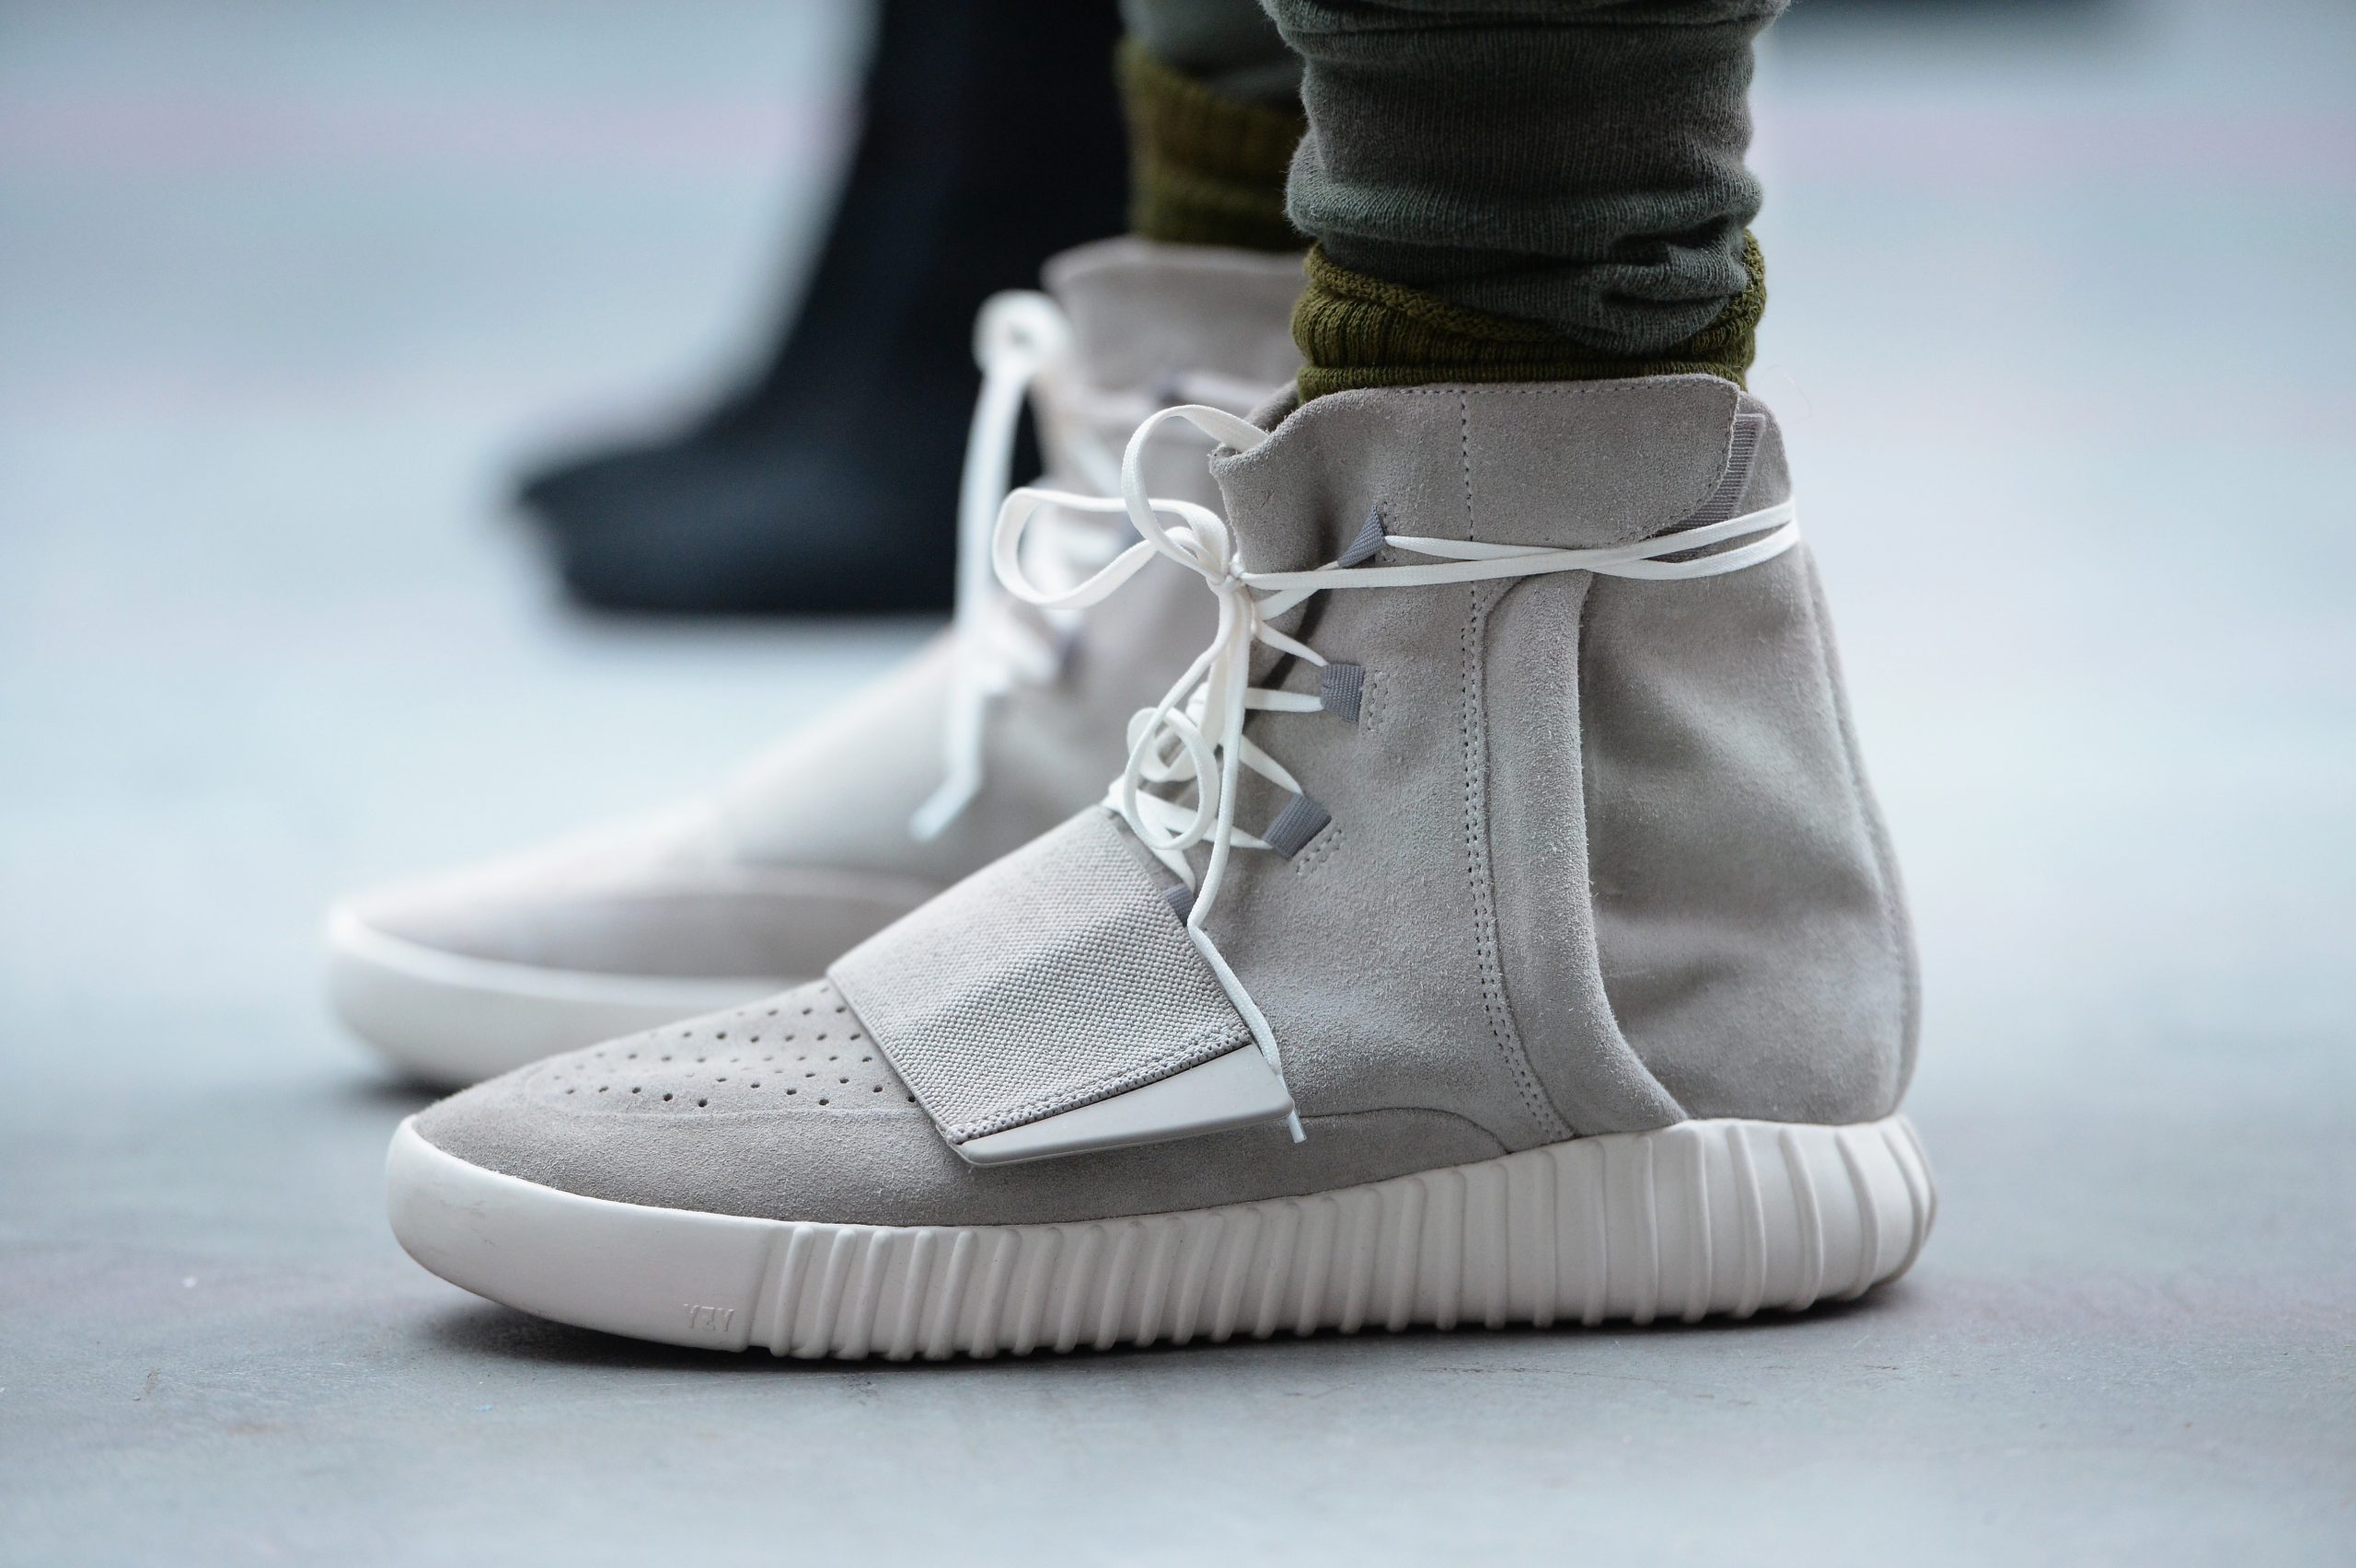 Kanye West Debuts New adidas Originals Yeezy Boost Sneaker scaled